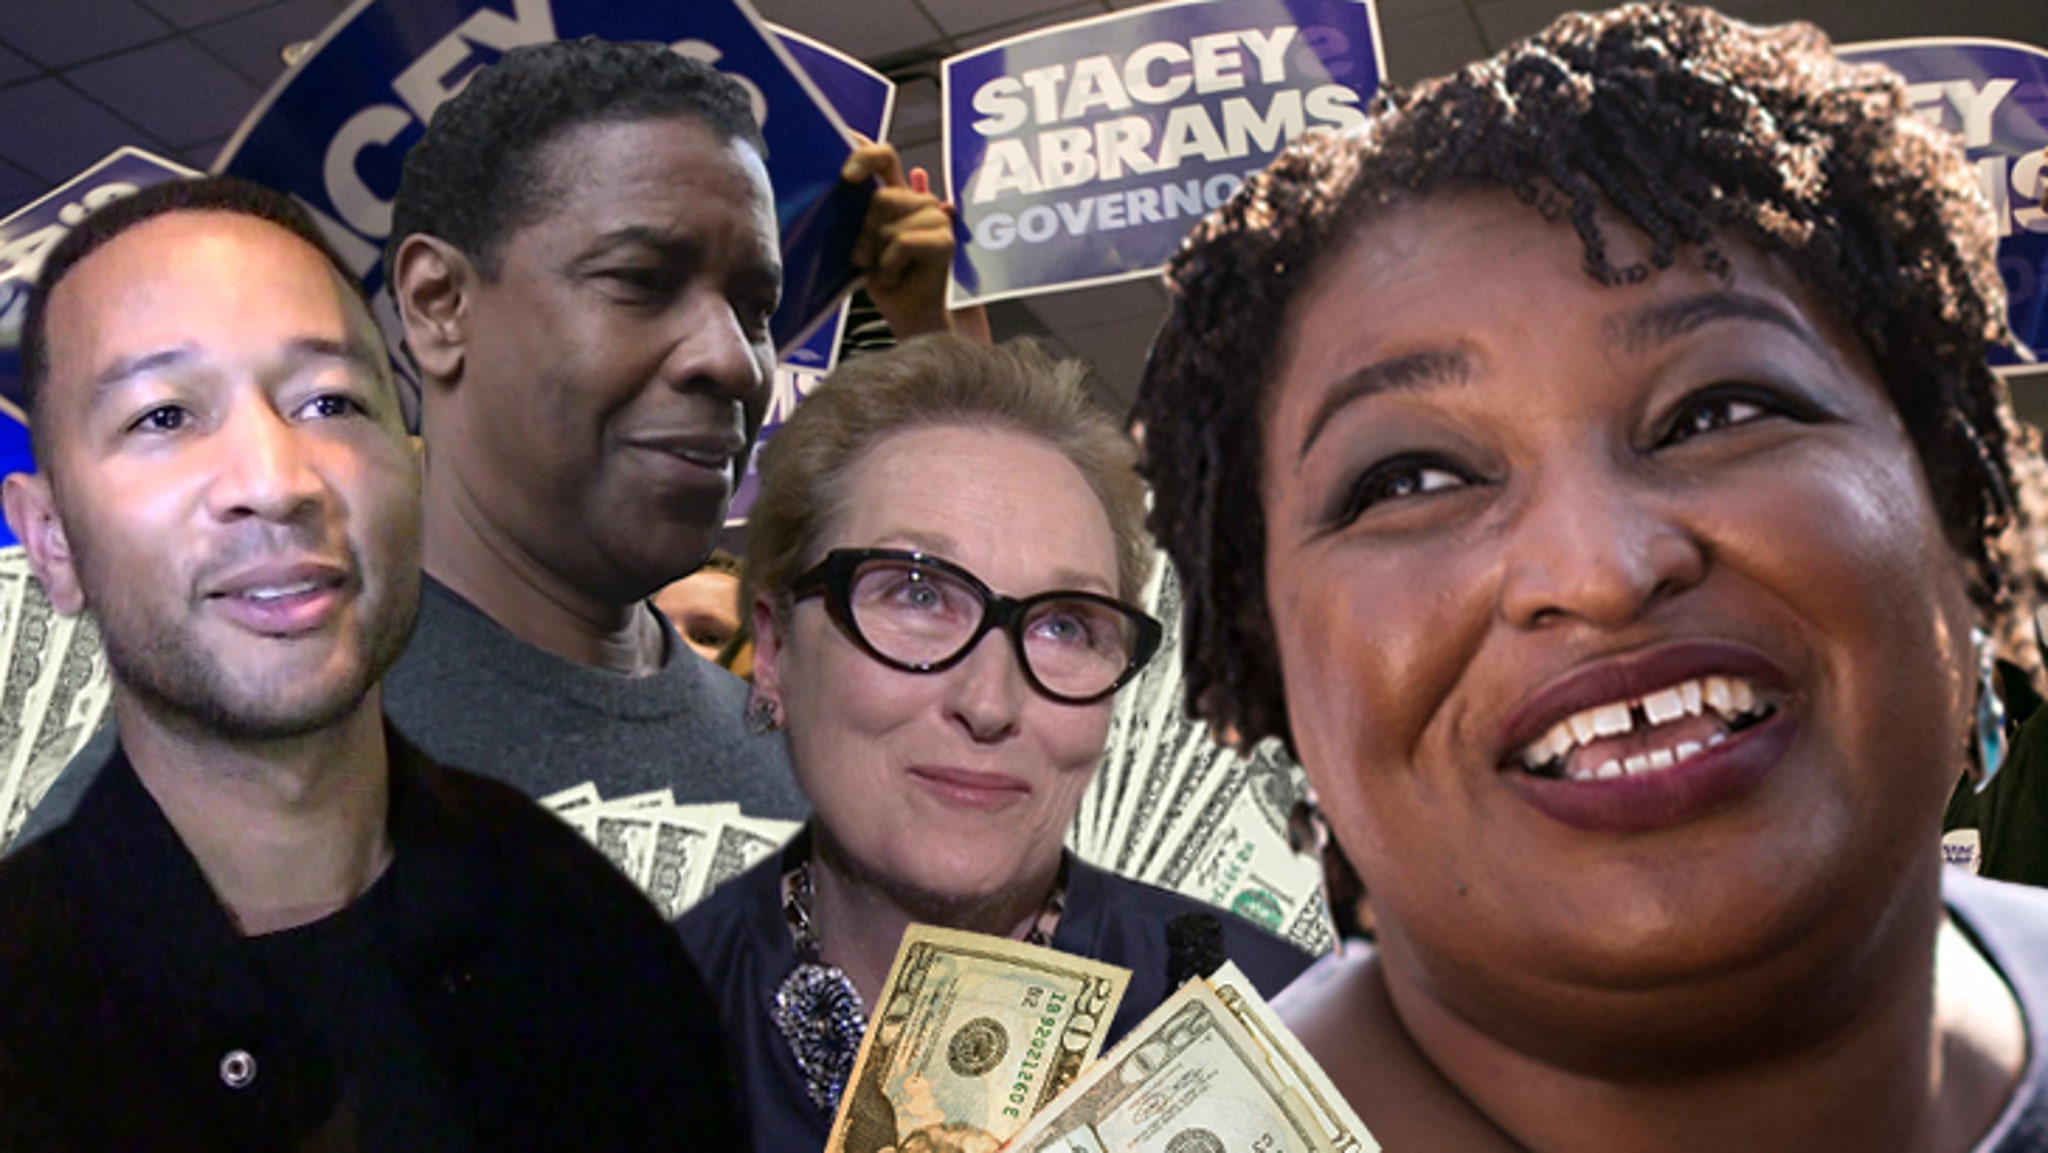 Stacey Abrams Banking on Legend, Washington, Streep to Be First Female Blac...